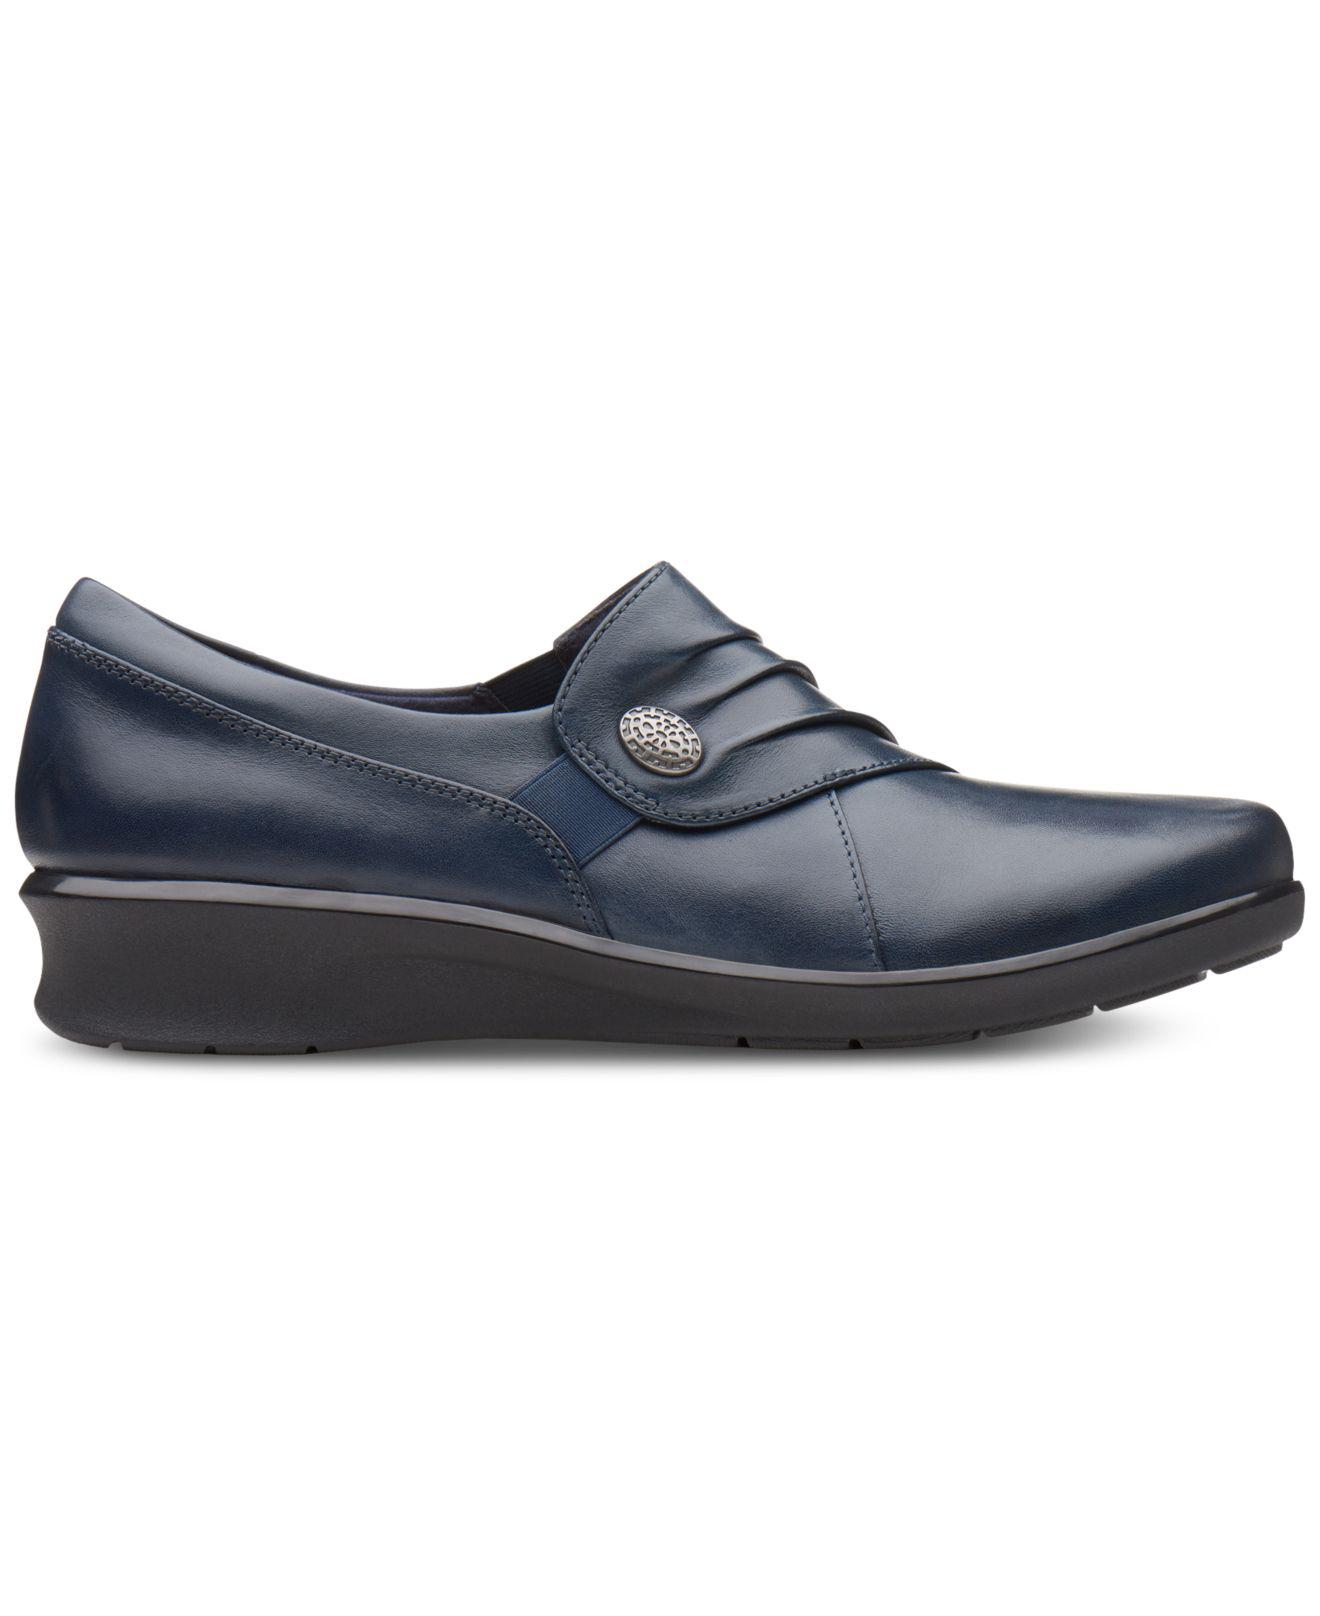 Ladies Clarks Hope Roxanne Navy Soft Leather Casual Slip On Walking Shoes